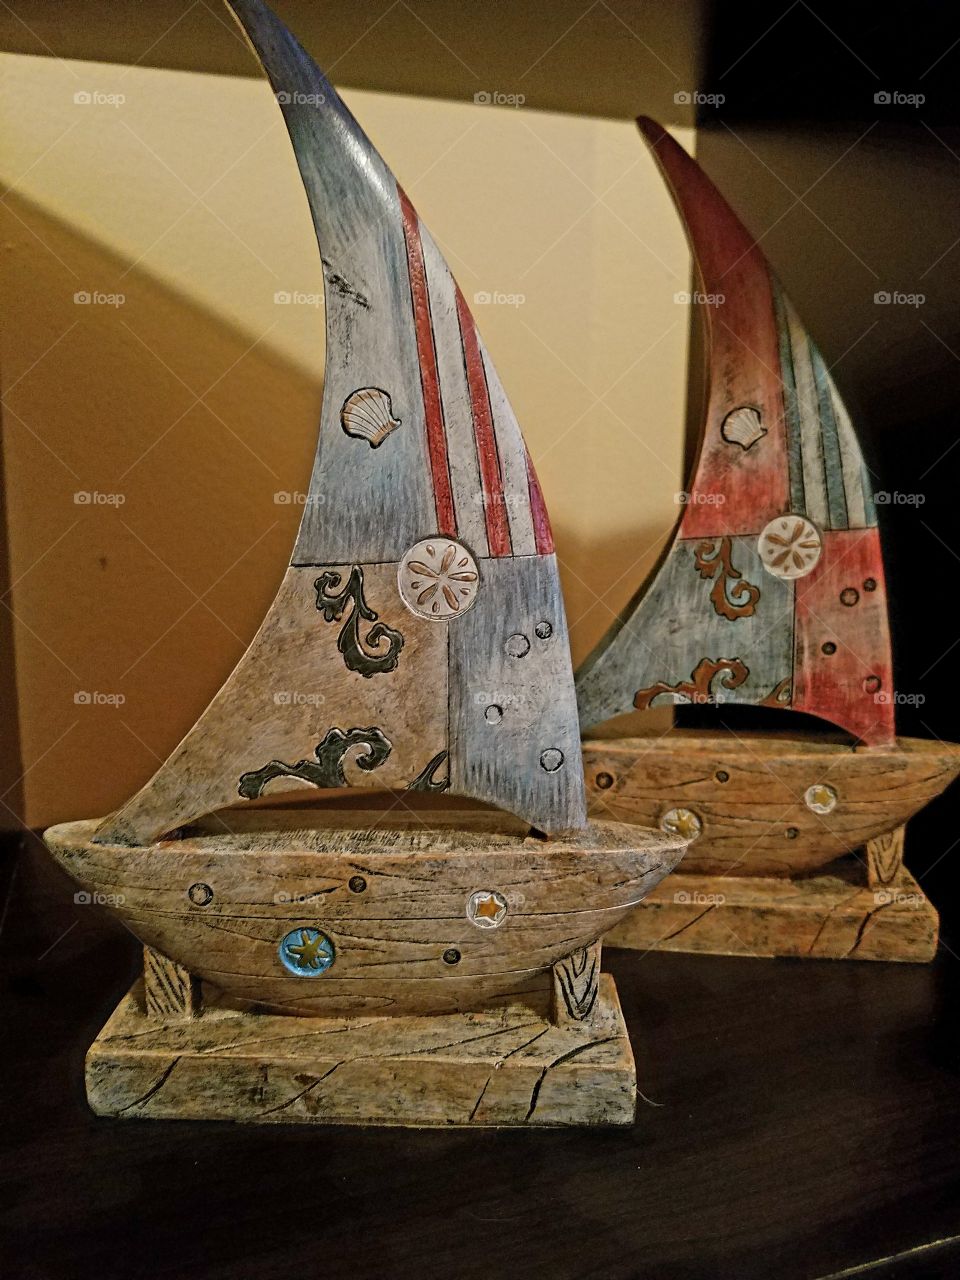 wood carved sailboats with varied colorful designs